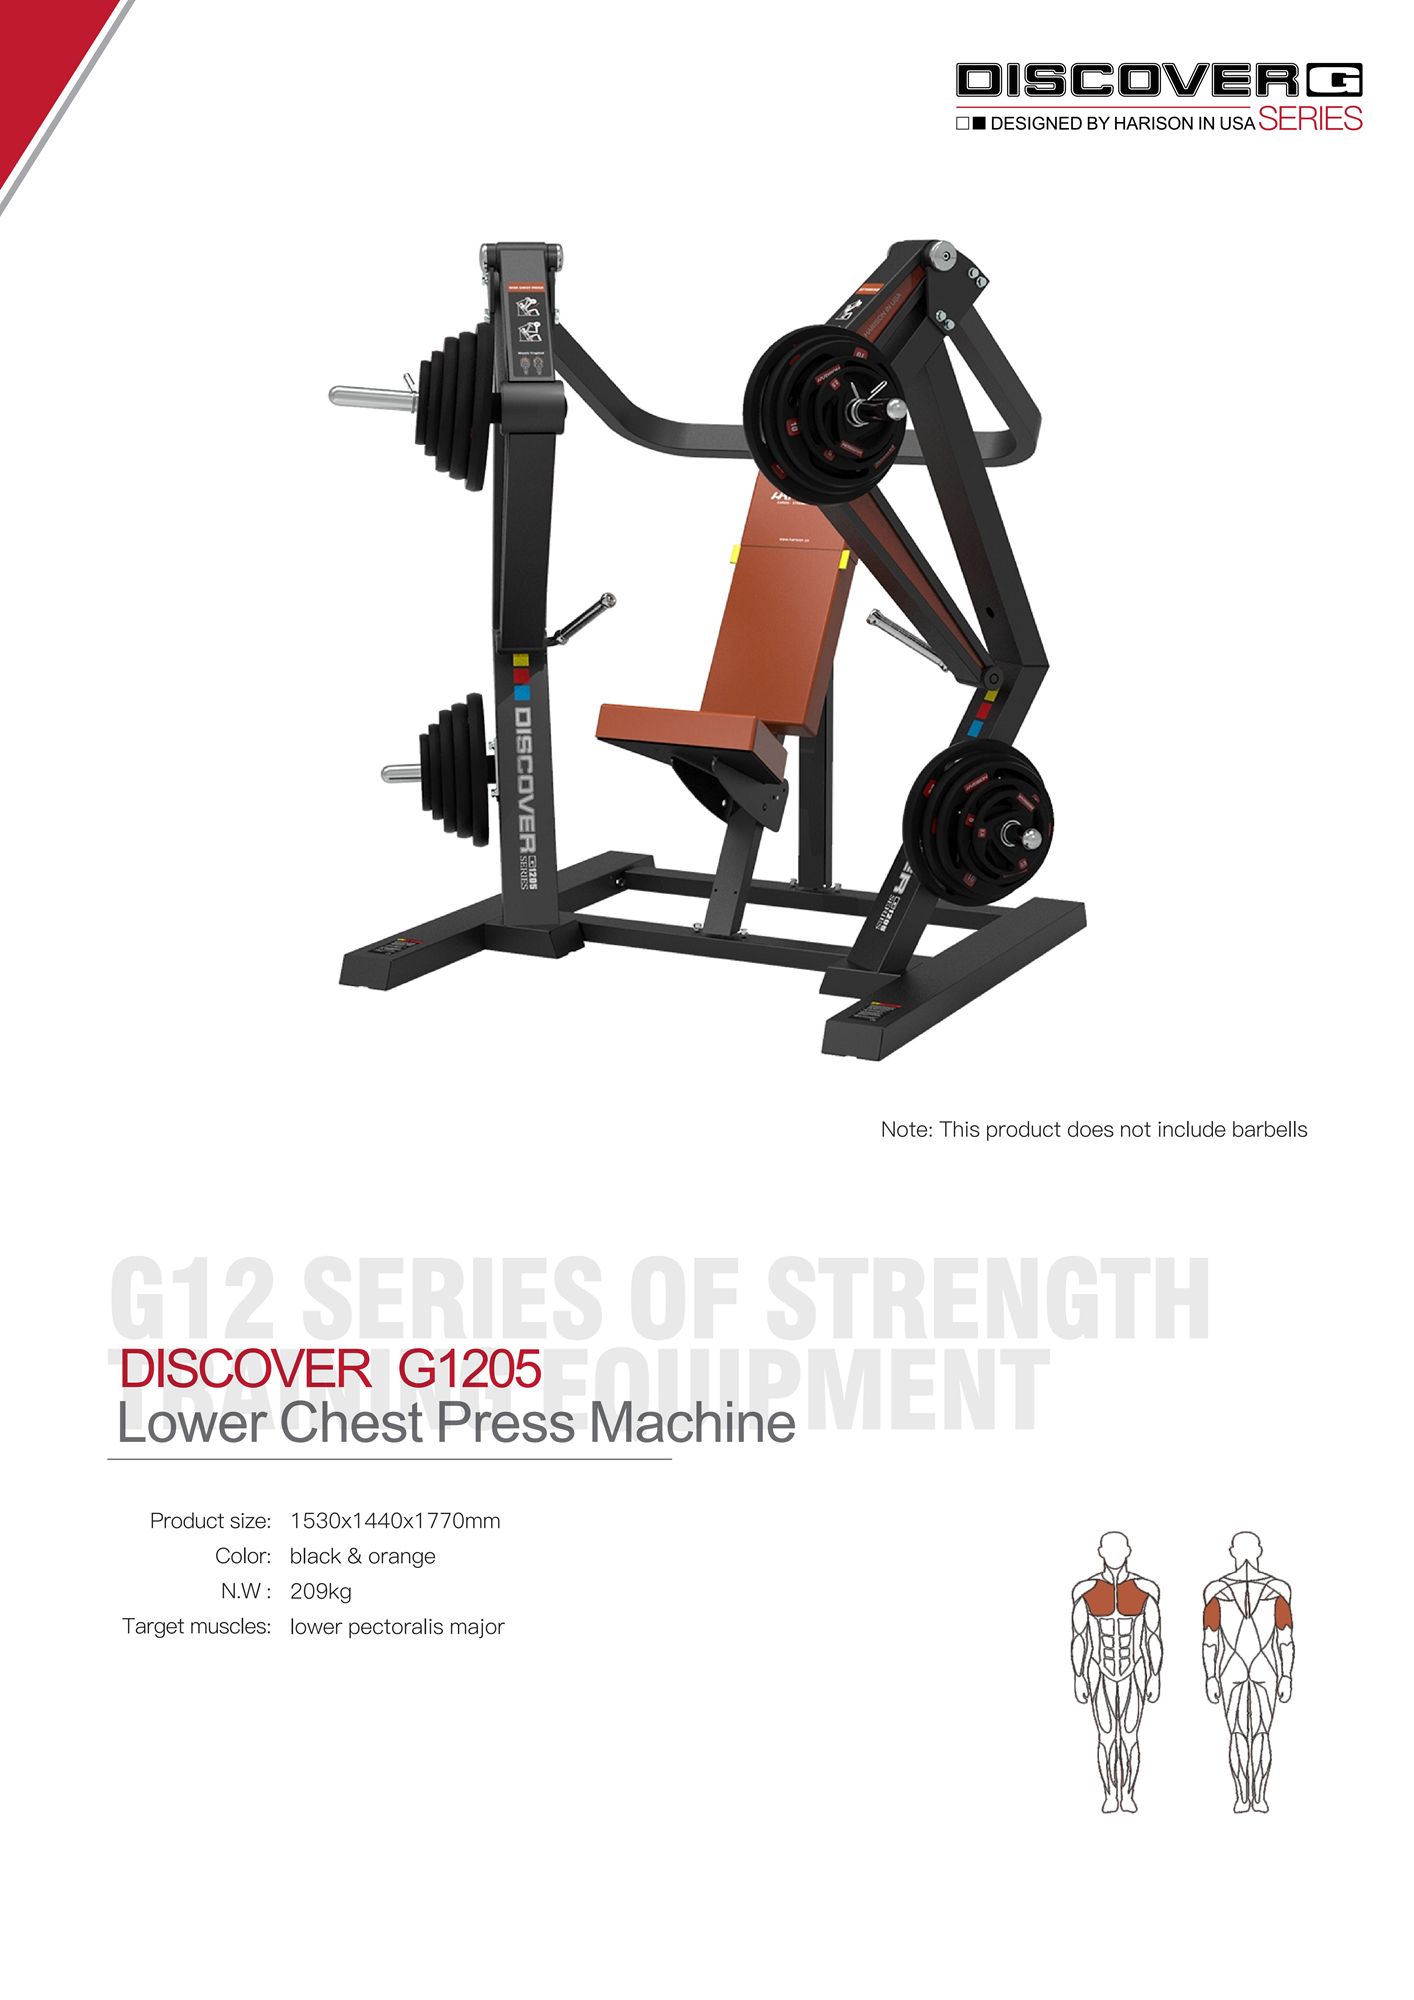 DISCOVER G1205 Lower Chest Press Machine